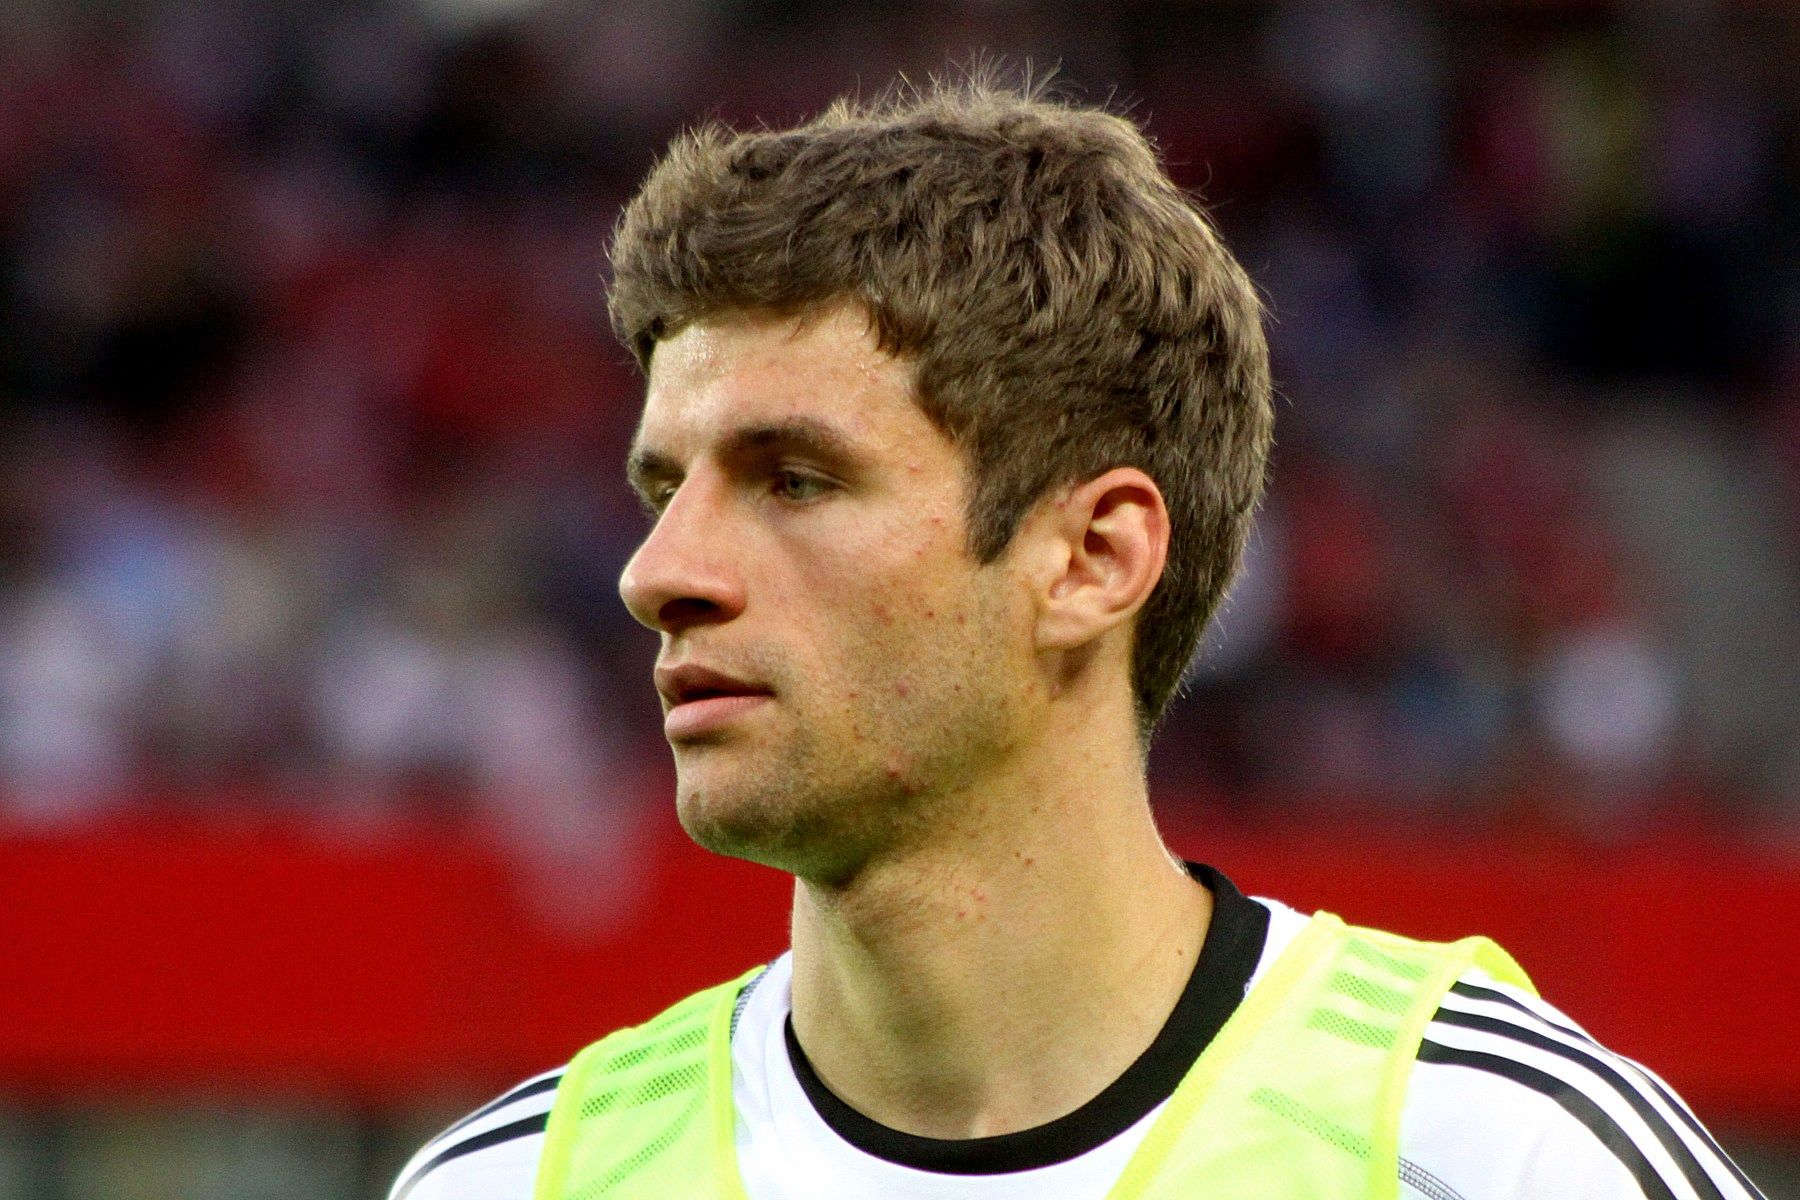 Thomas Müller admits he hopes for Germany recall